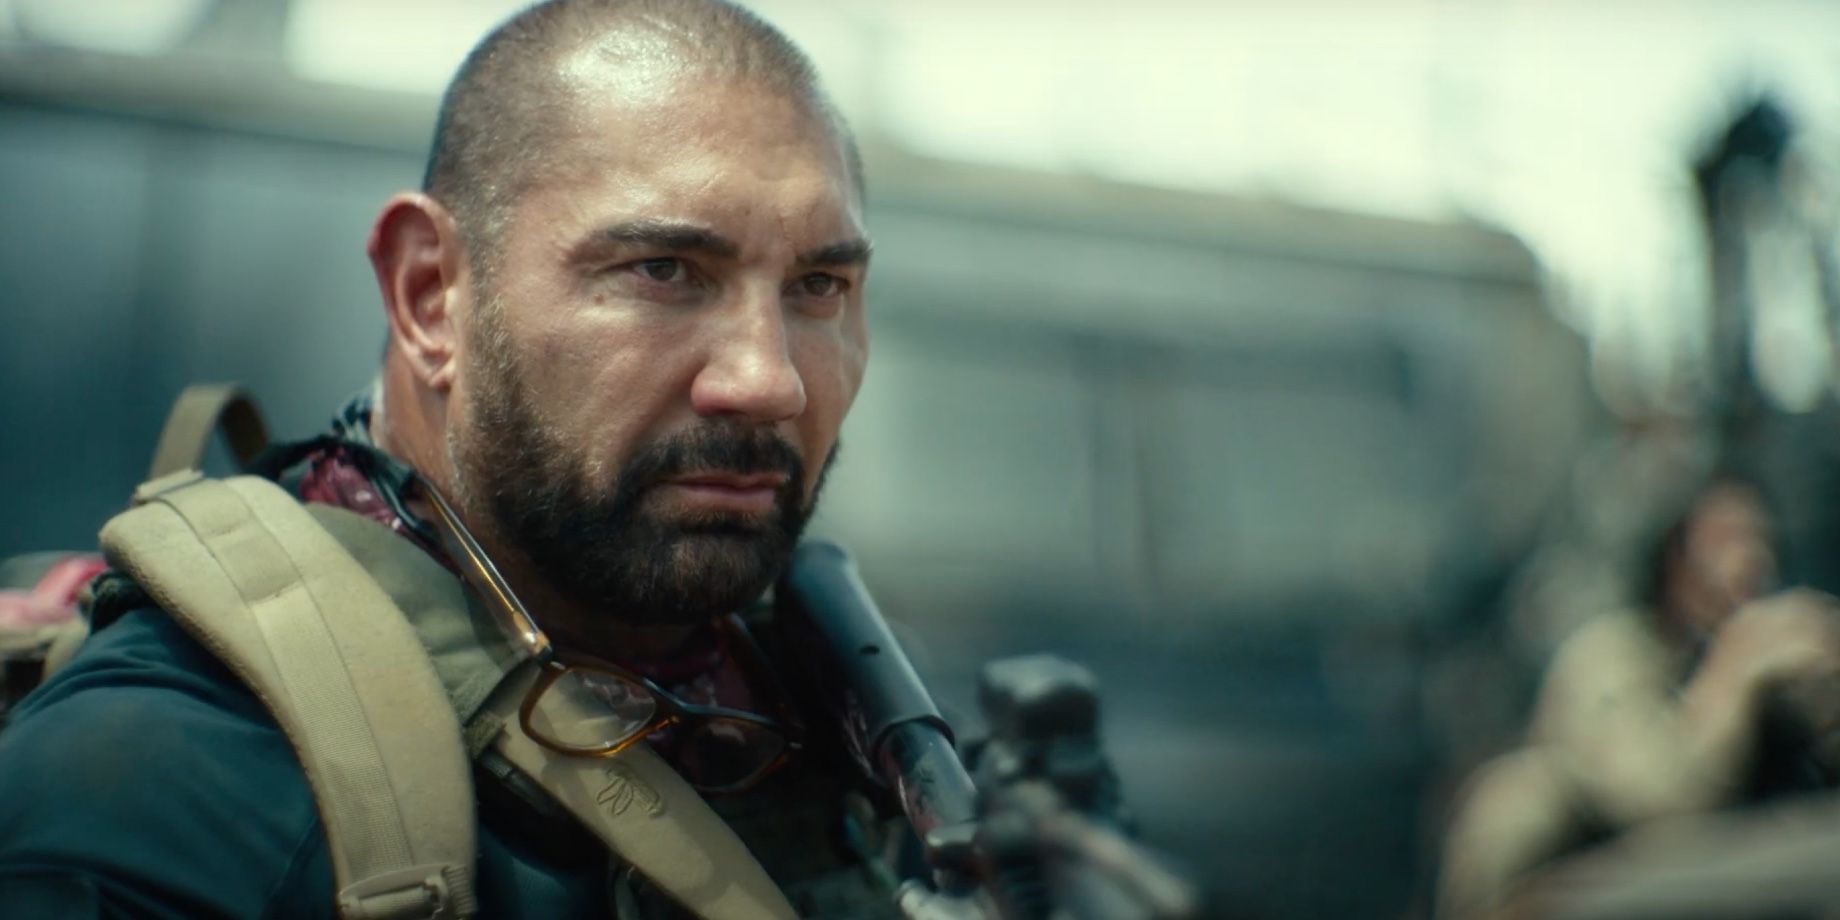 Army of the Dead Isn’t Just Focused on Blood & Guts, Says Dave Bautista